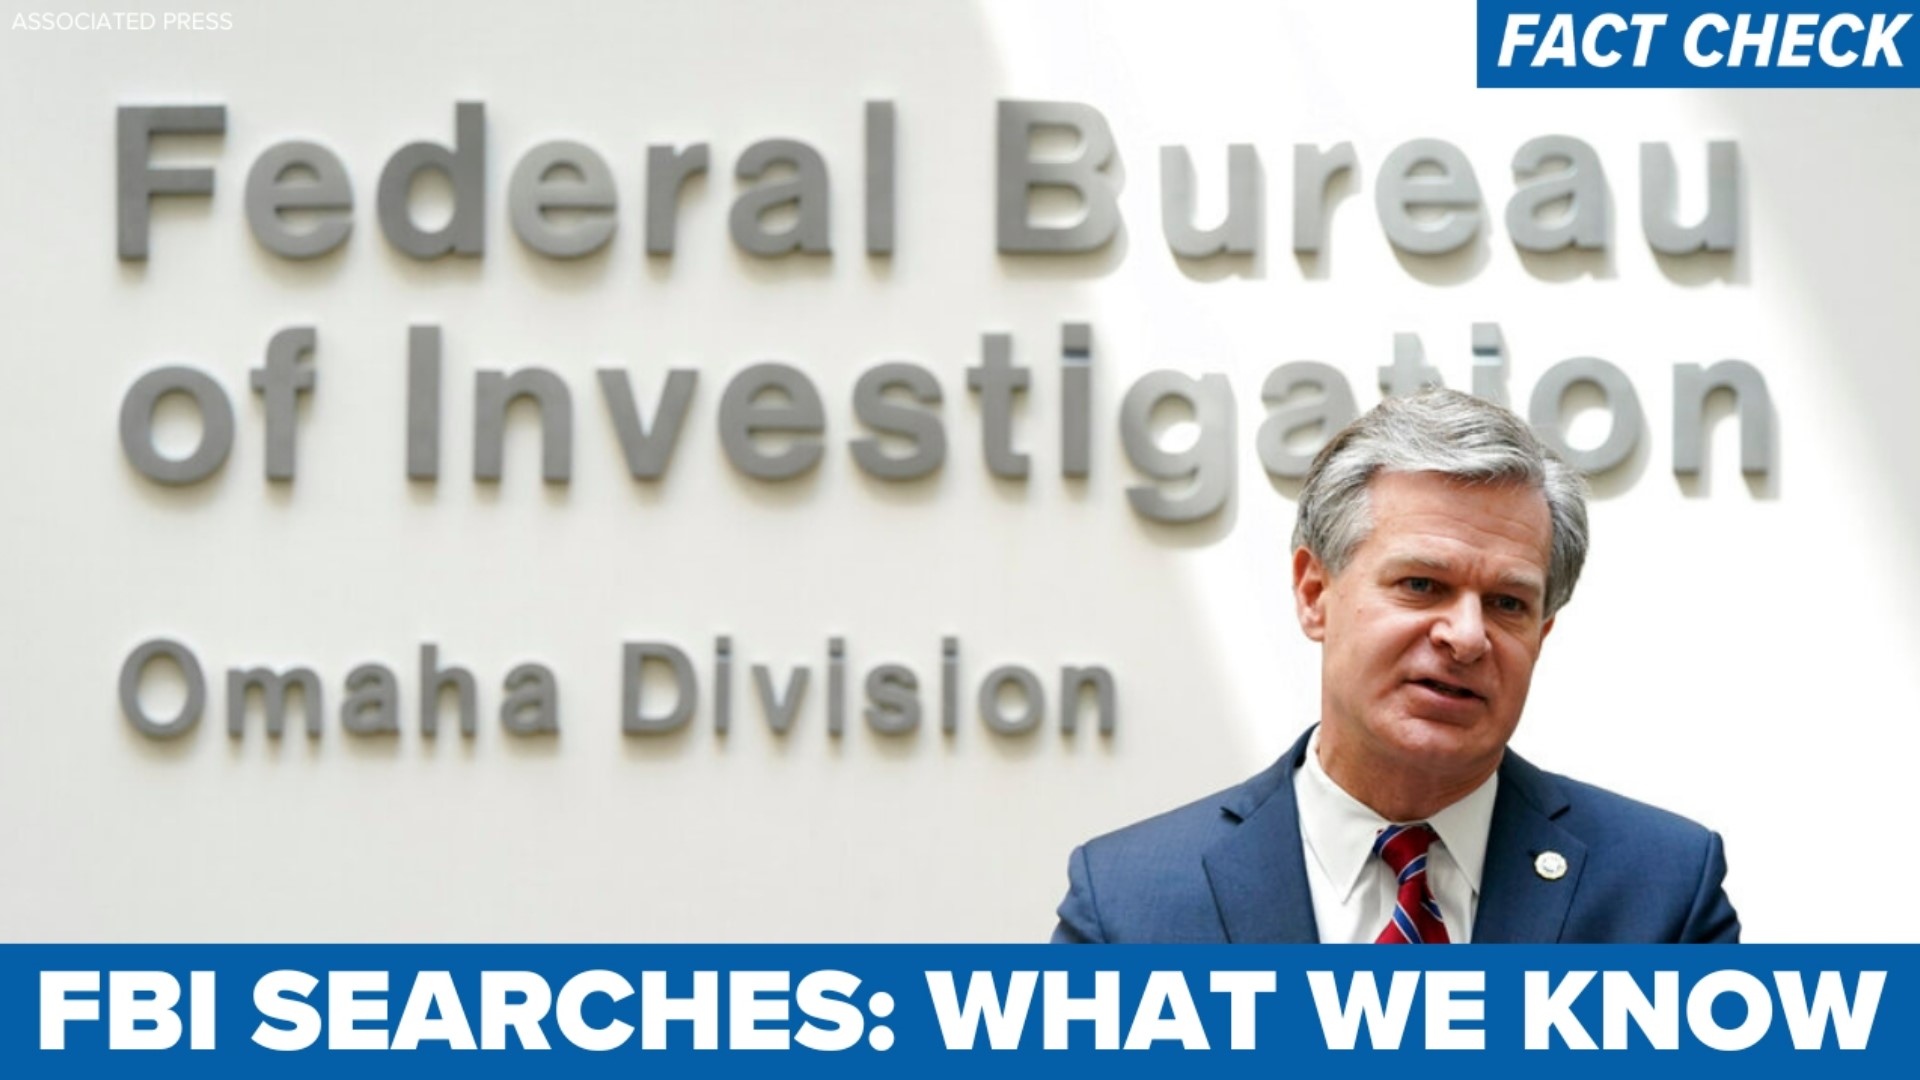 Who authorizes a search warrant? Can anyone's home be subject to a search by the FBI? Our Verify team investigates.